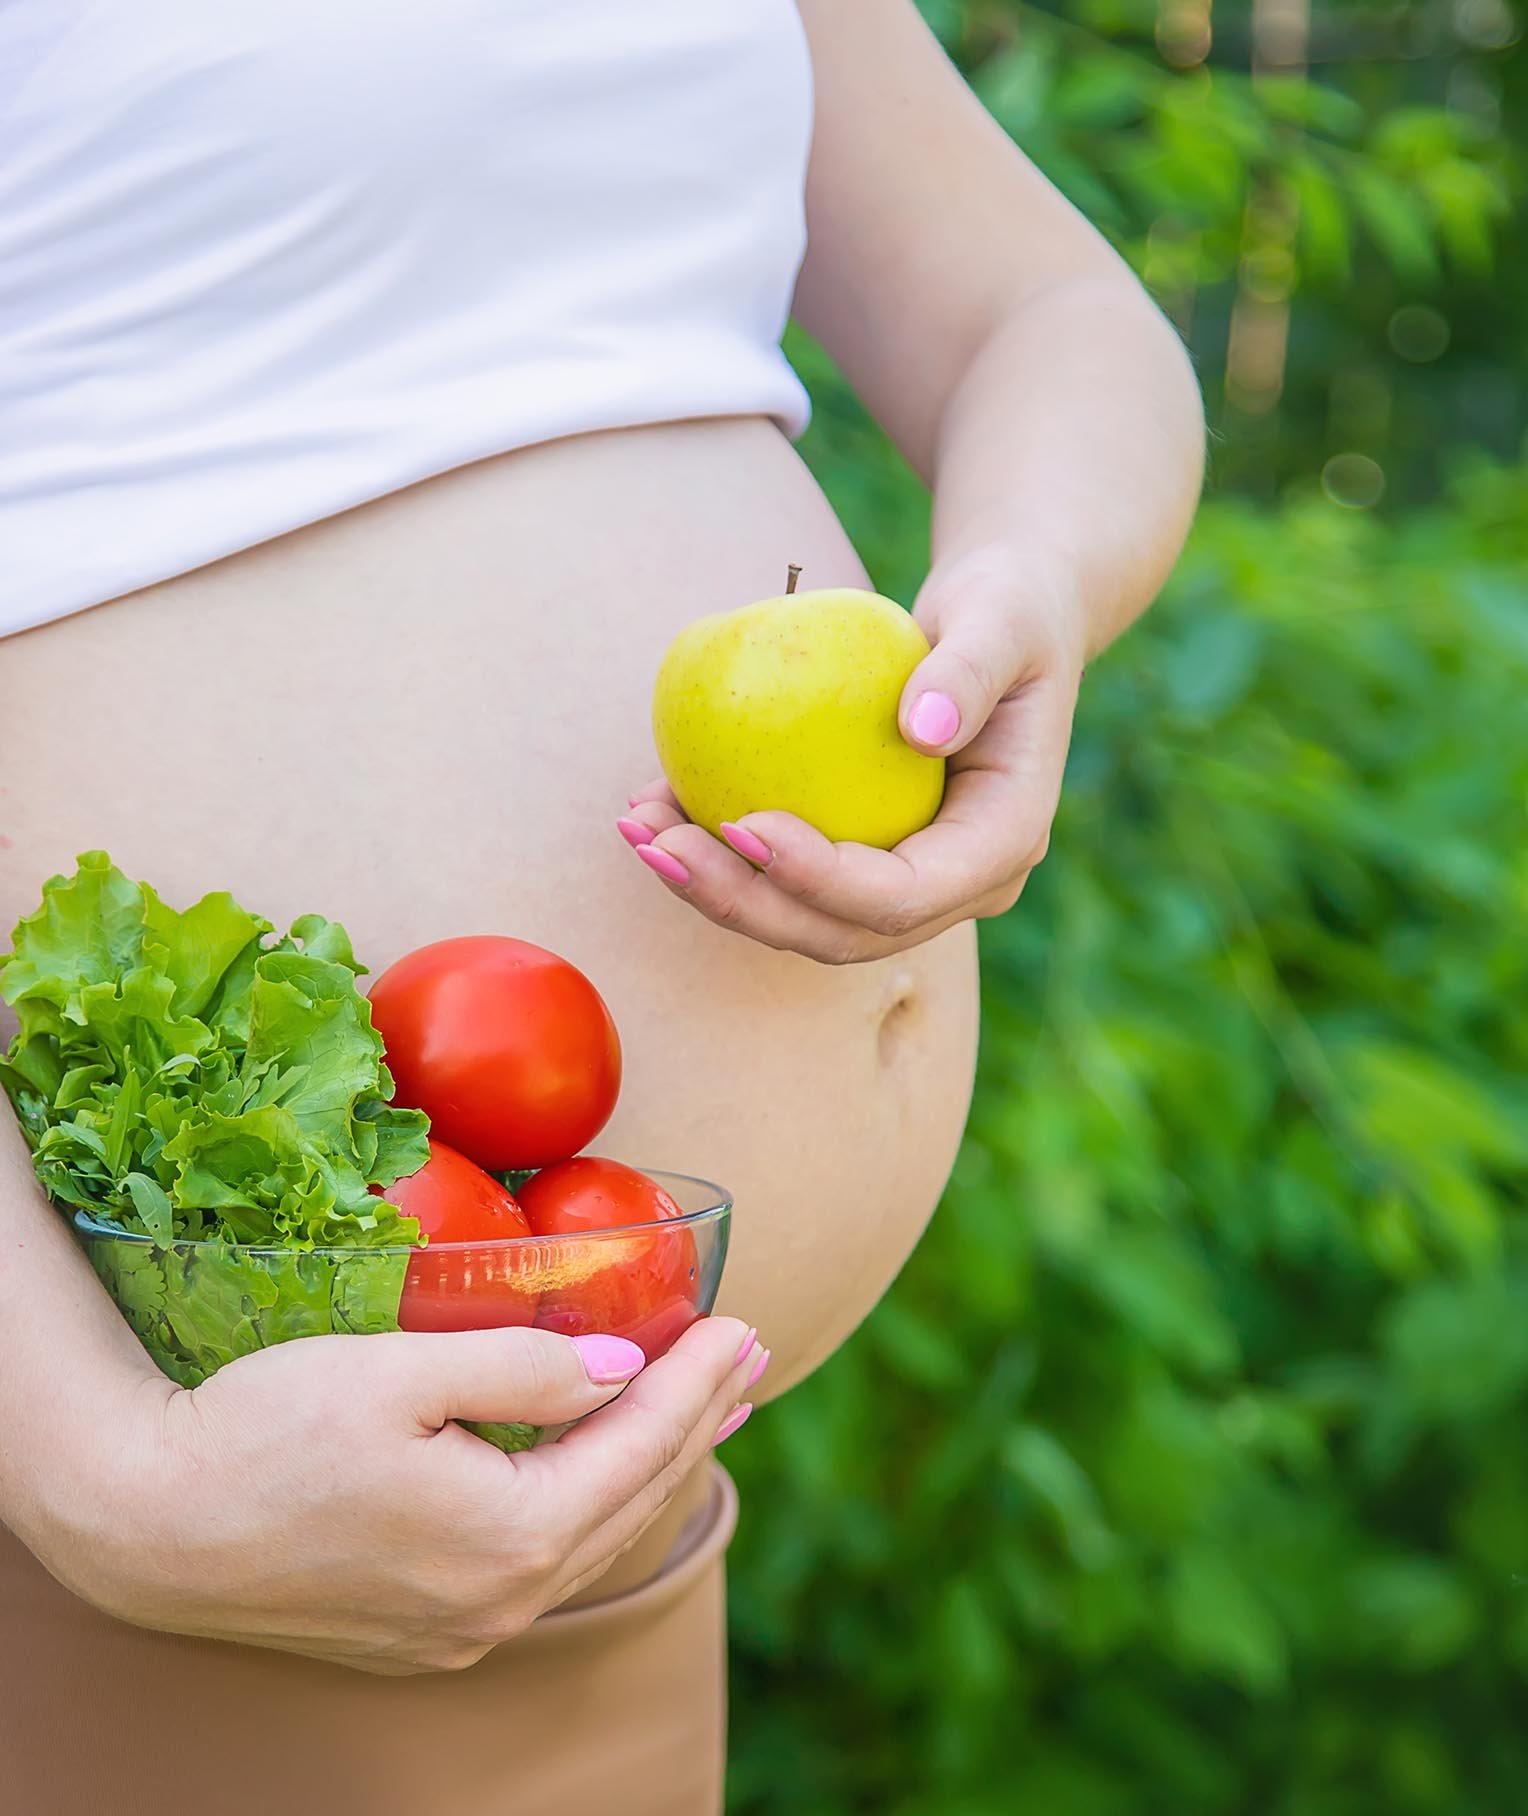 12 Unhealthy Foods to Avoid During Pregnancy